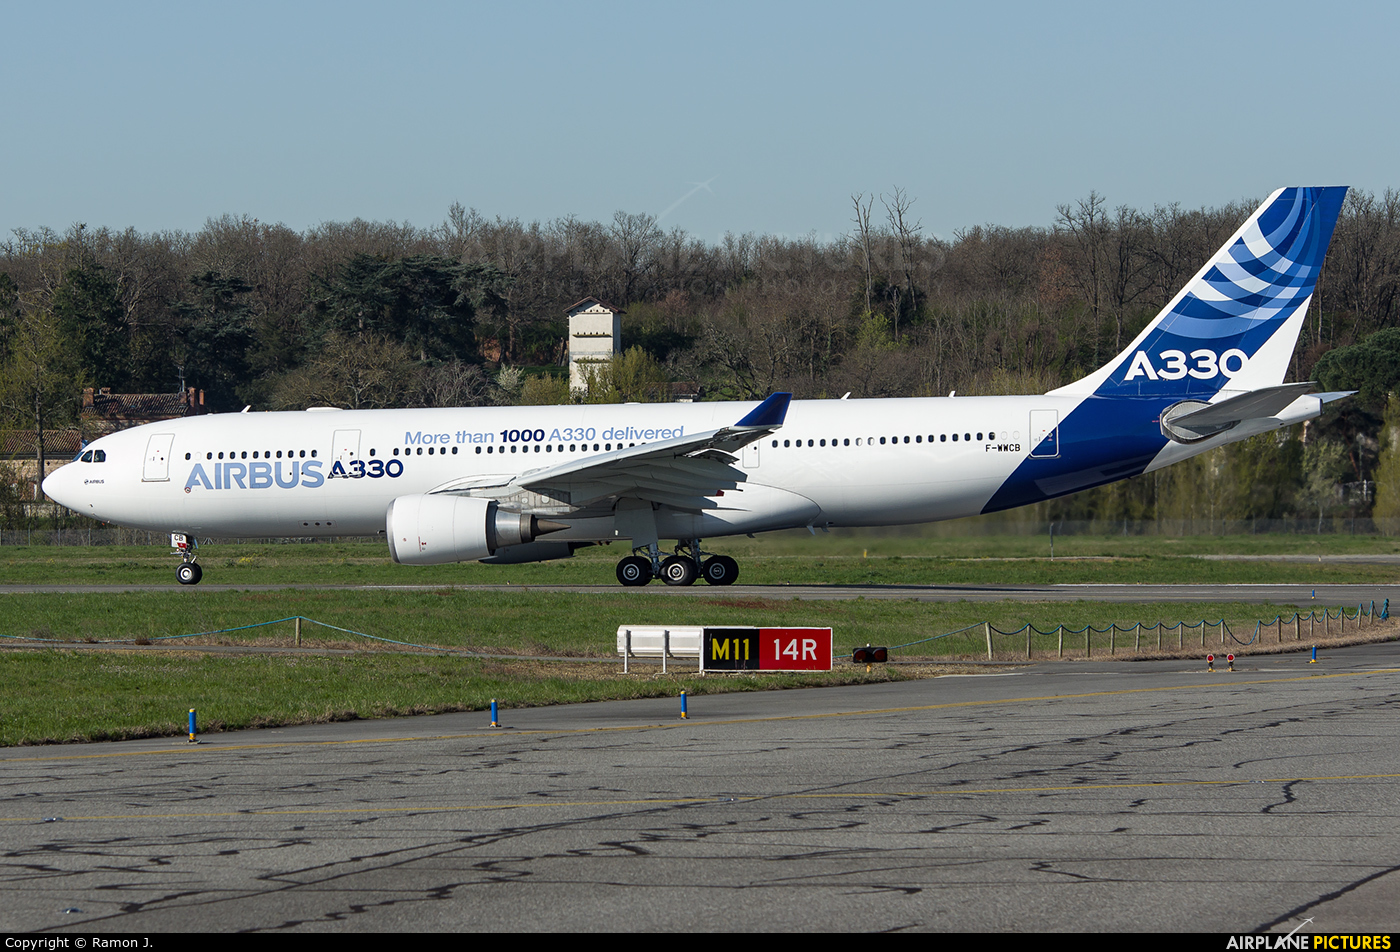 Airbus Industrie F-WWCB aircraft at Toulouse - Blagnac